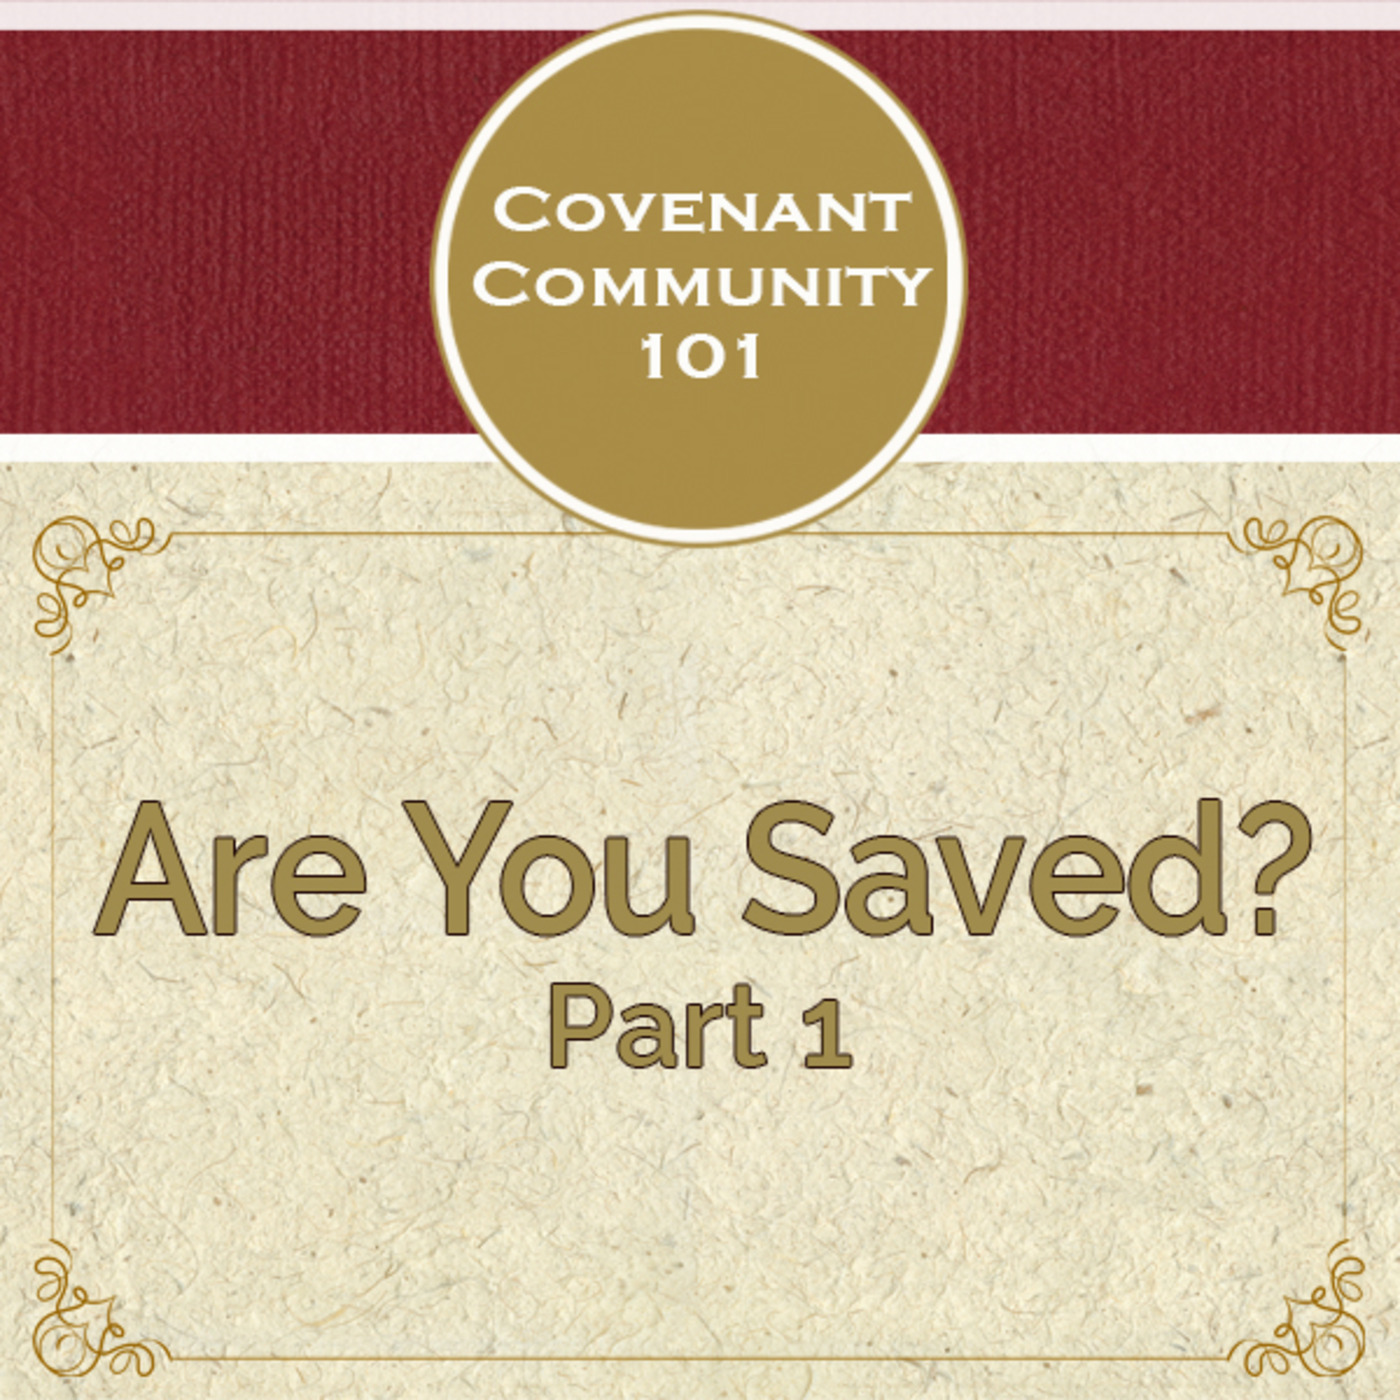 Covenant Community 101: Are You Saved? Part 1